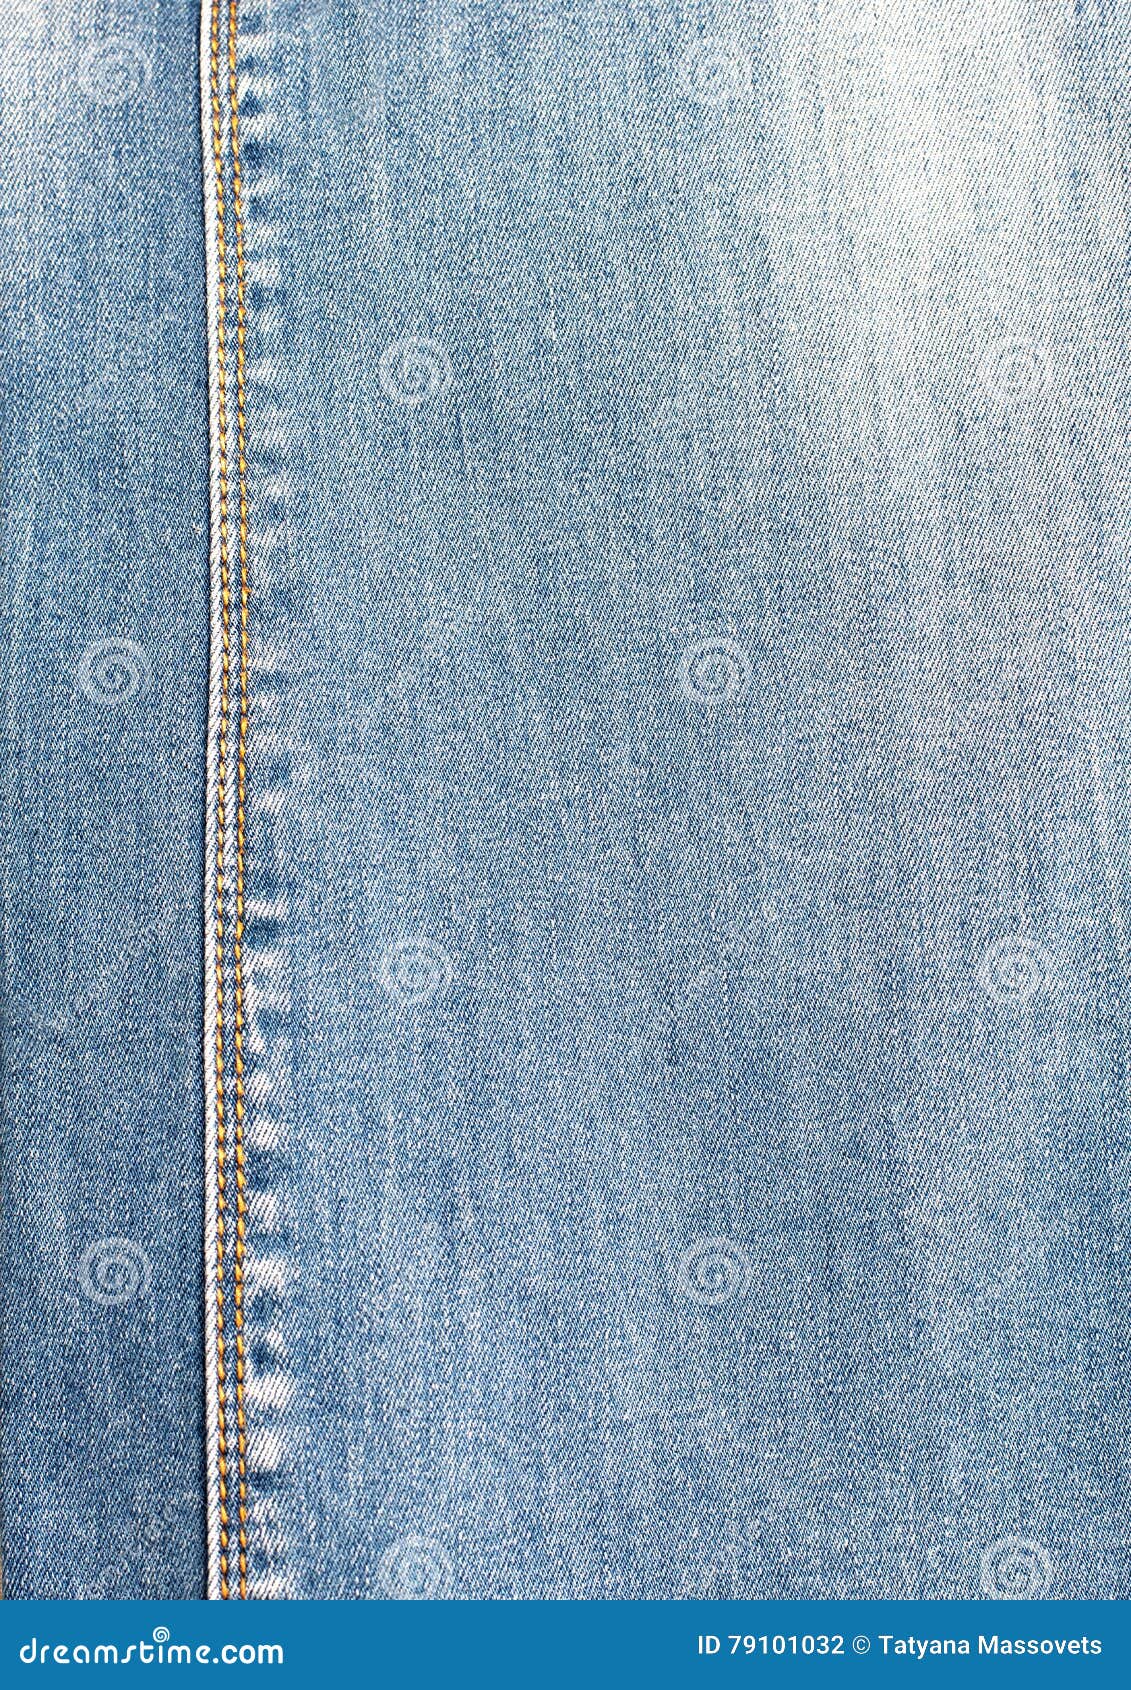 Denim Blue Fabric for the Base Product Stock Photo - Image of blue ...